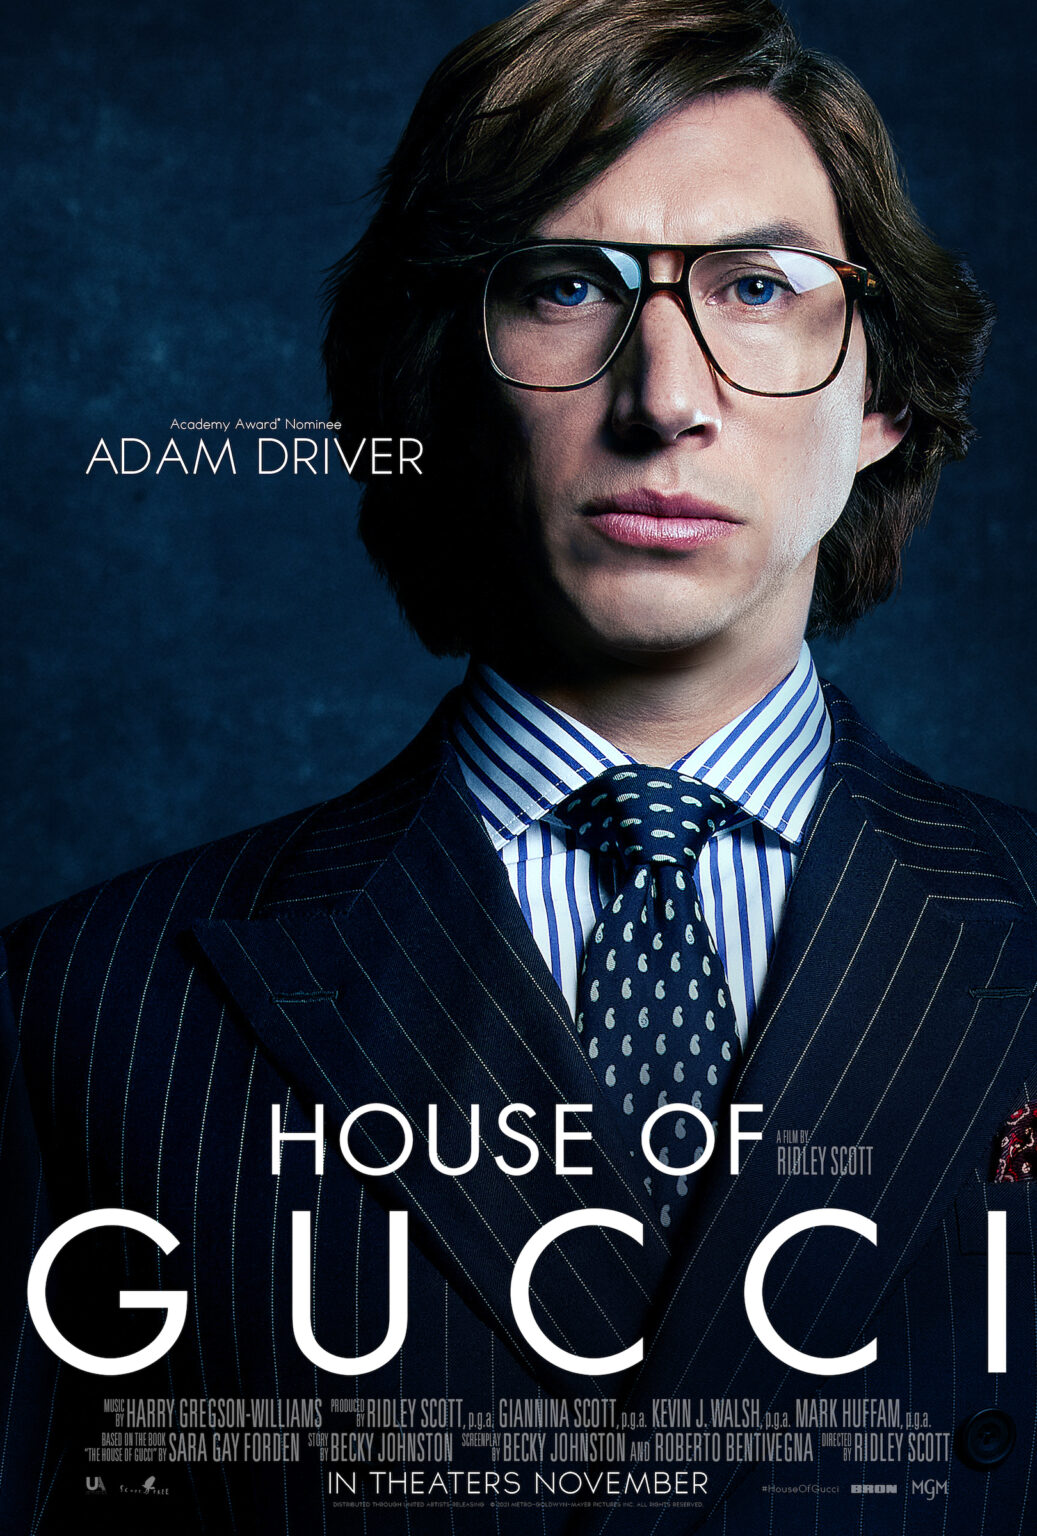 Character posters and a trailer were released to promote the latest Adam Driver movie, 'House of Gucci'. How have the cast transformed?